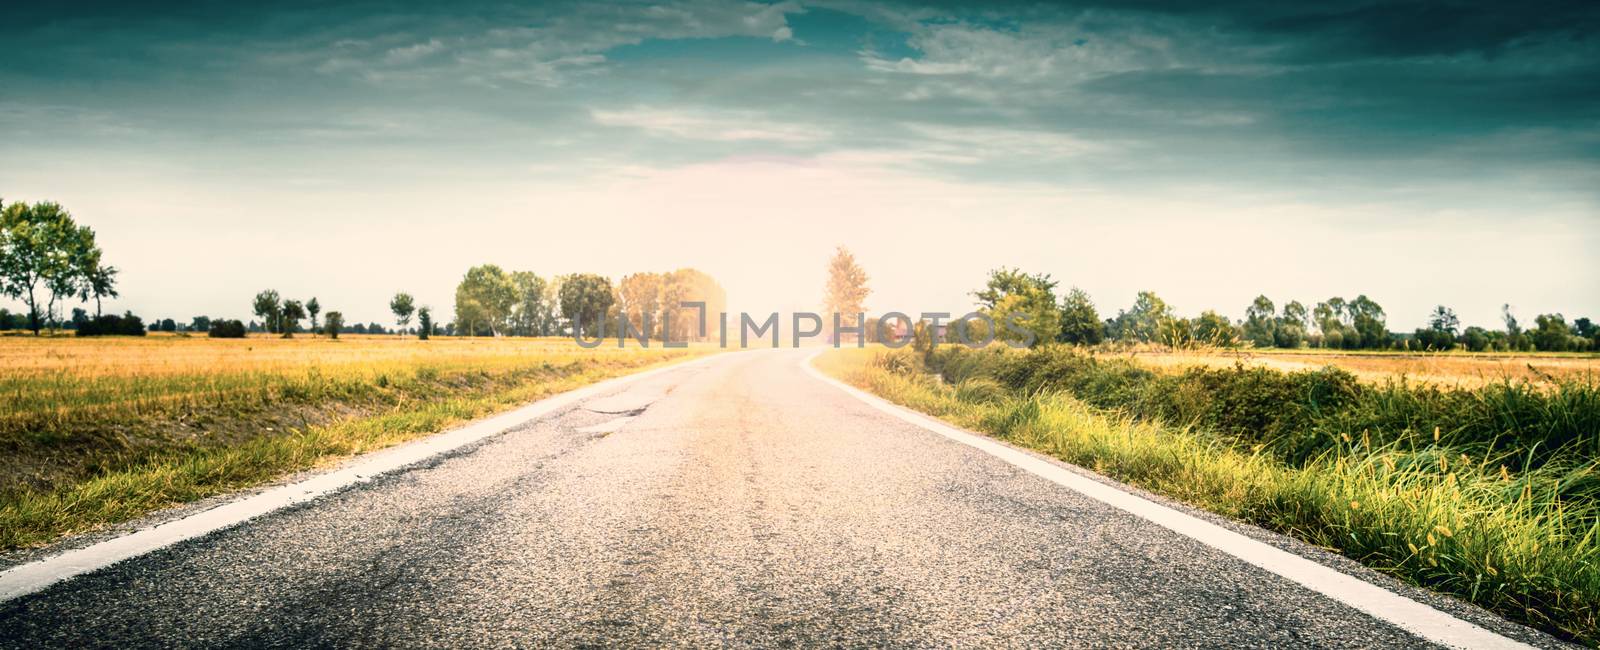 view of a country road by photobeps